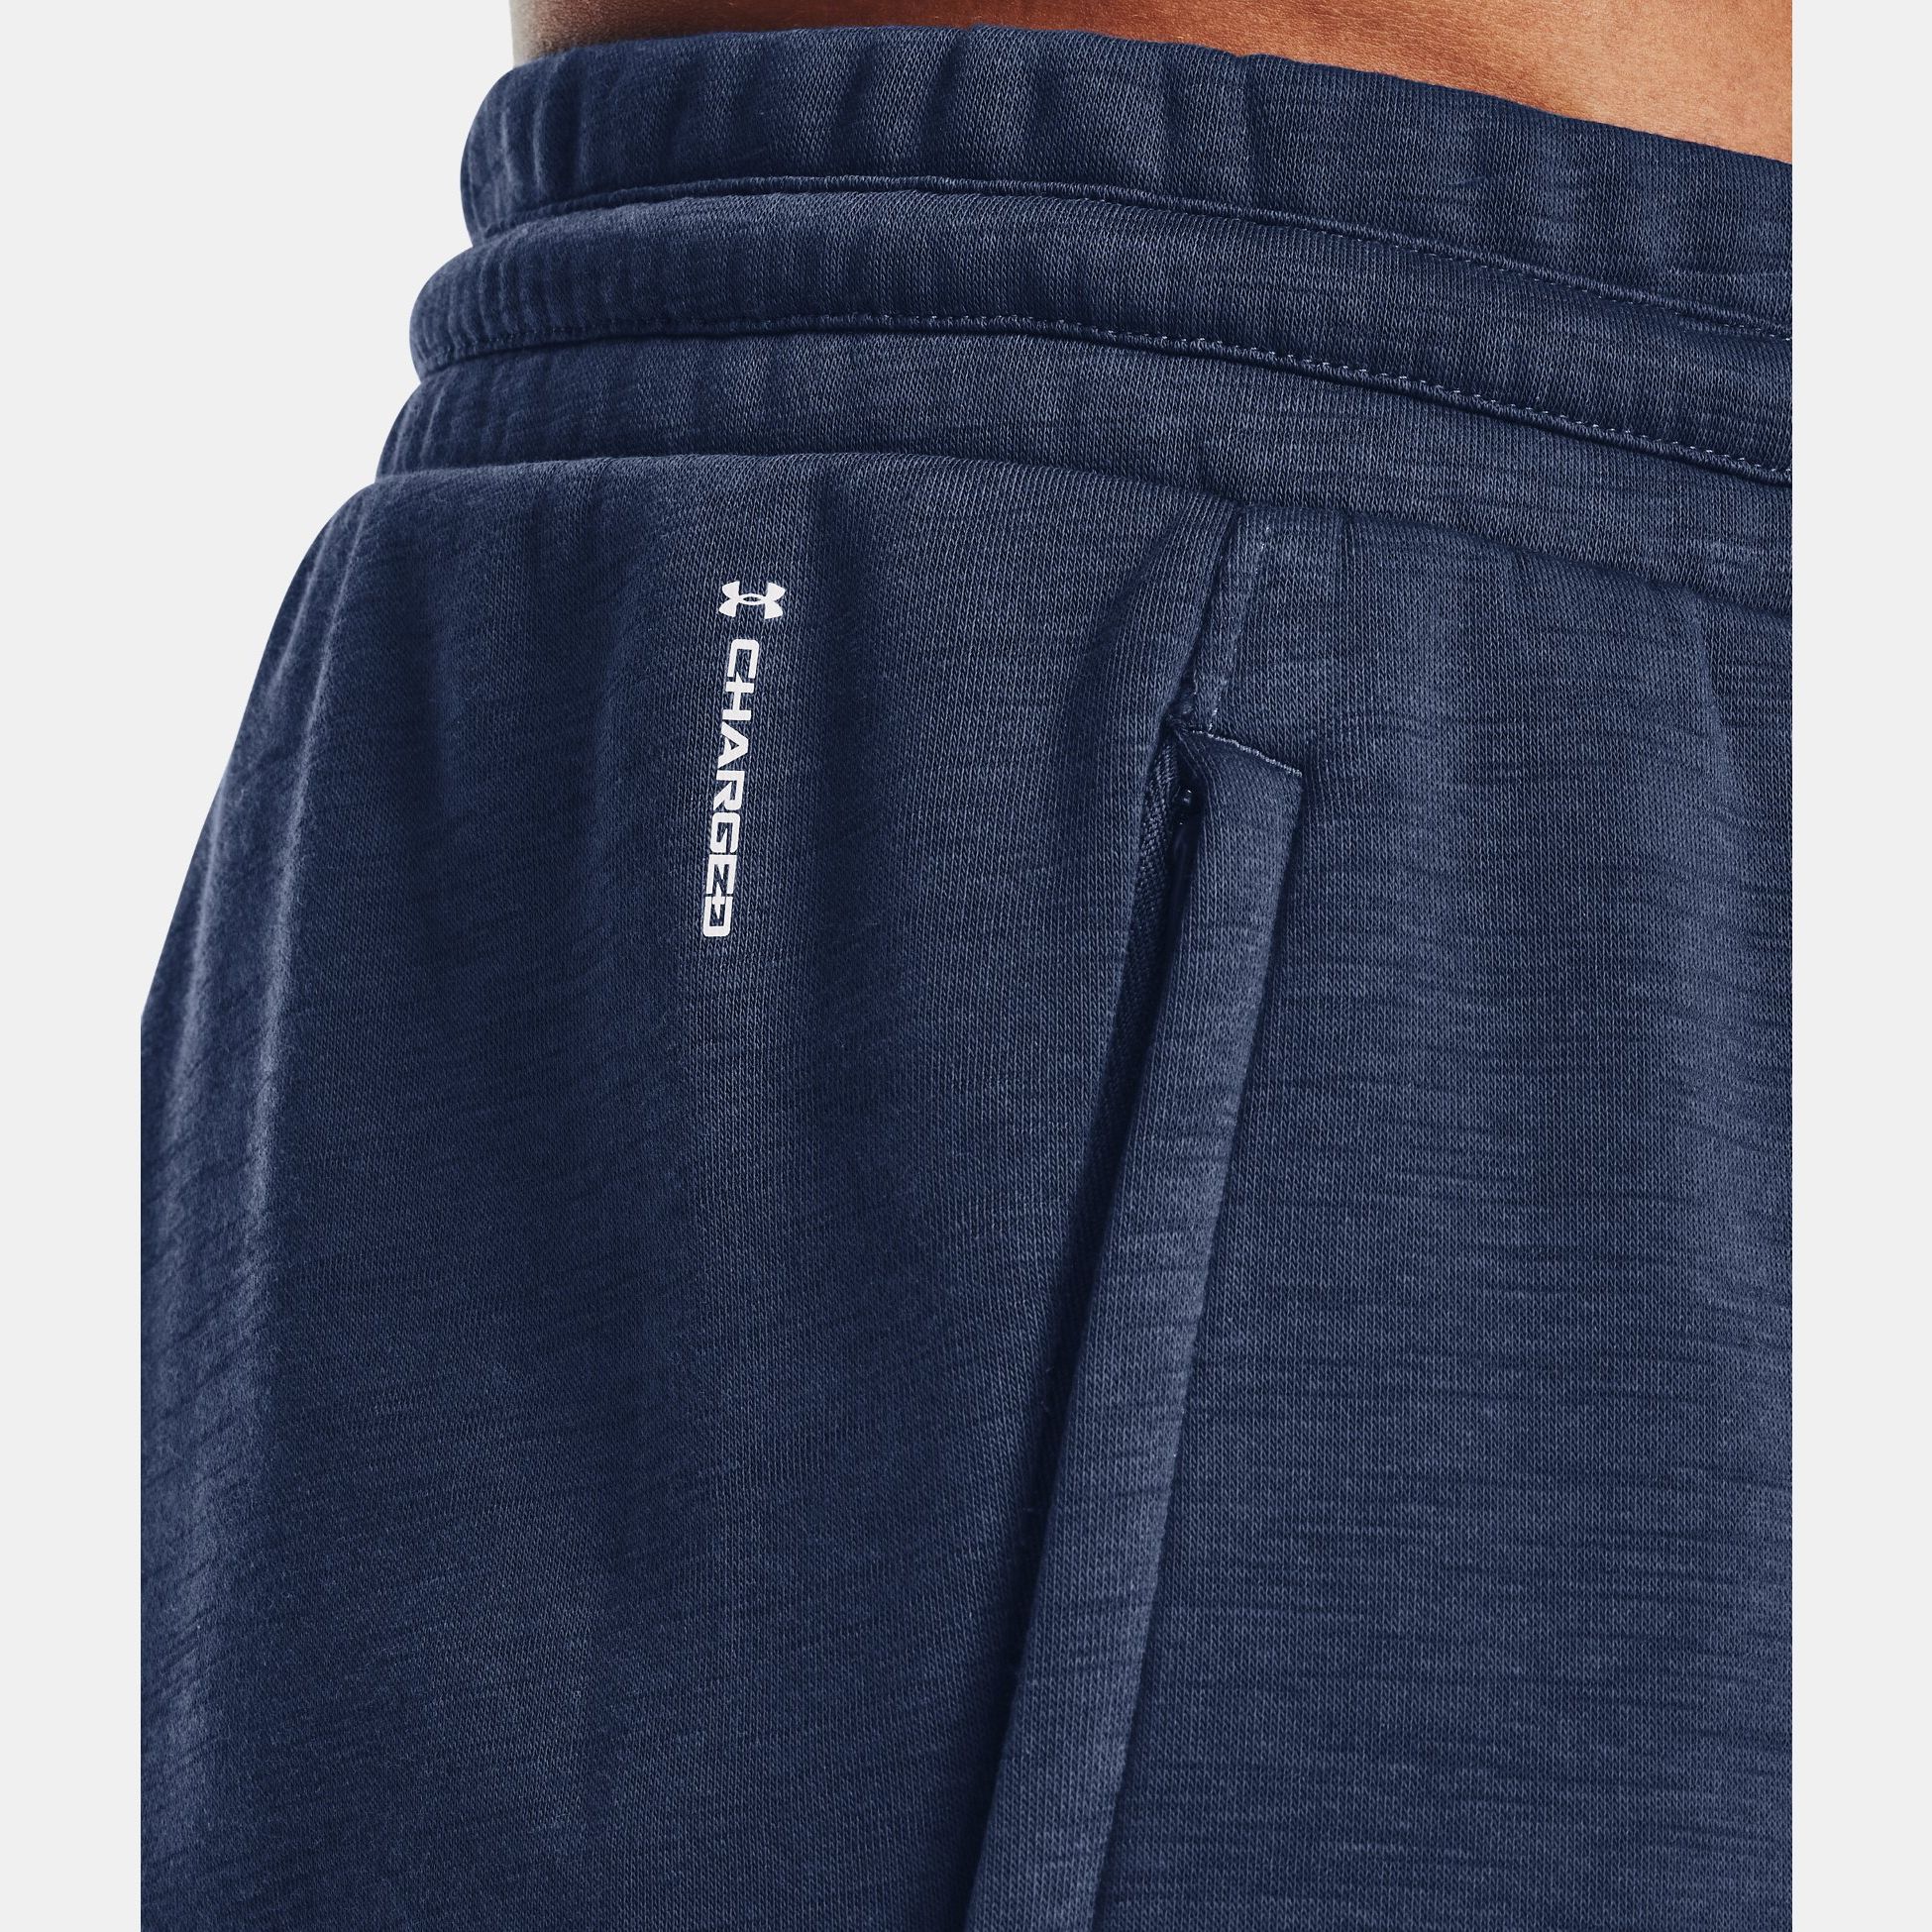 Joggers & Sweatpants -  under armour Project Rock Charged Cotton Fleece Joggers